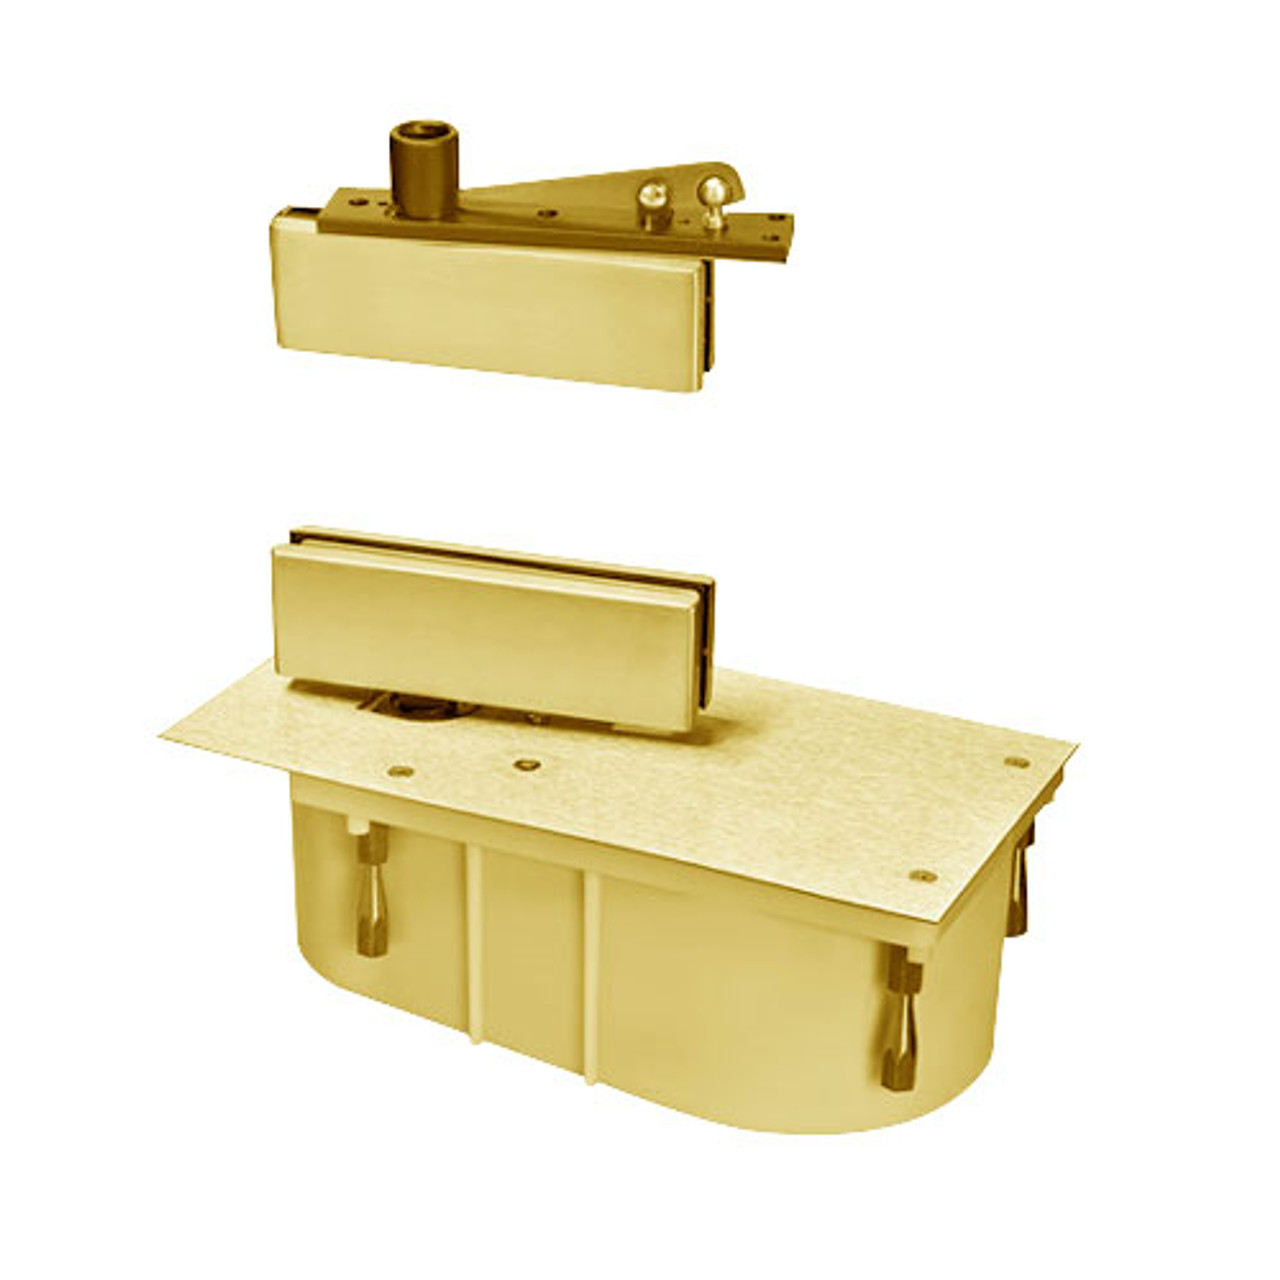 428-105N-LTP-LH-605 Rixson 428 Series Heavy Duty Single Acting Center Hung Floor Closer with Patch Fittings in Bright Brass Finish